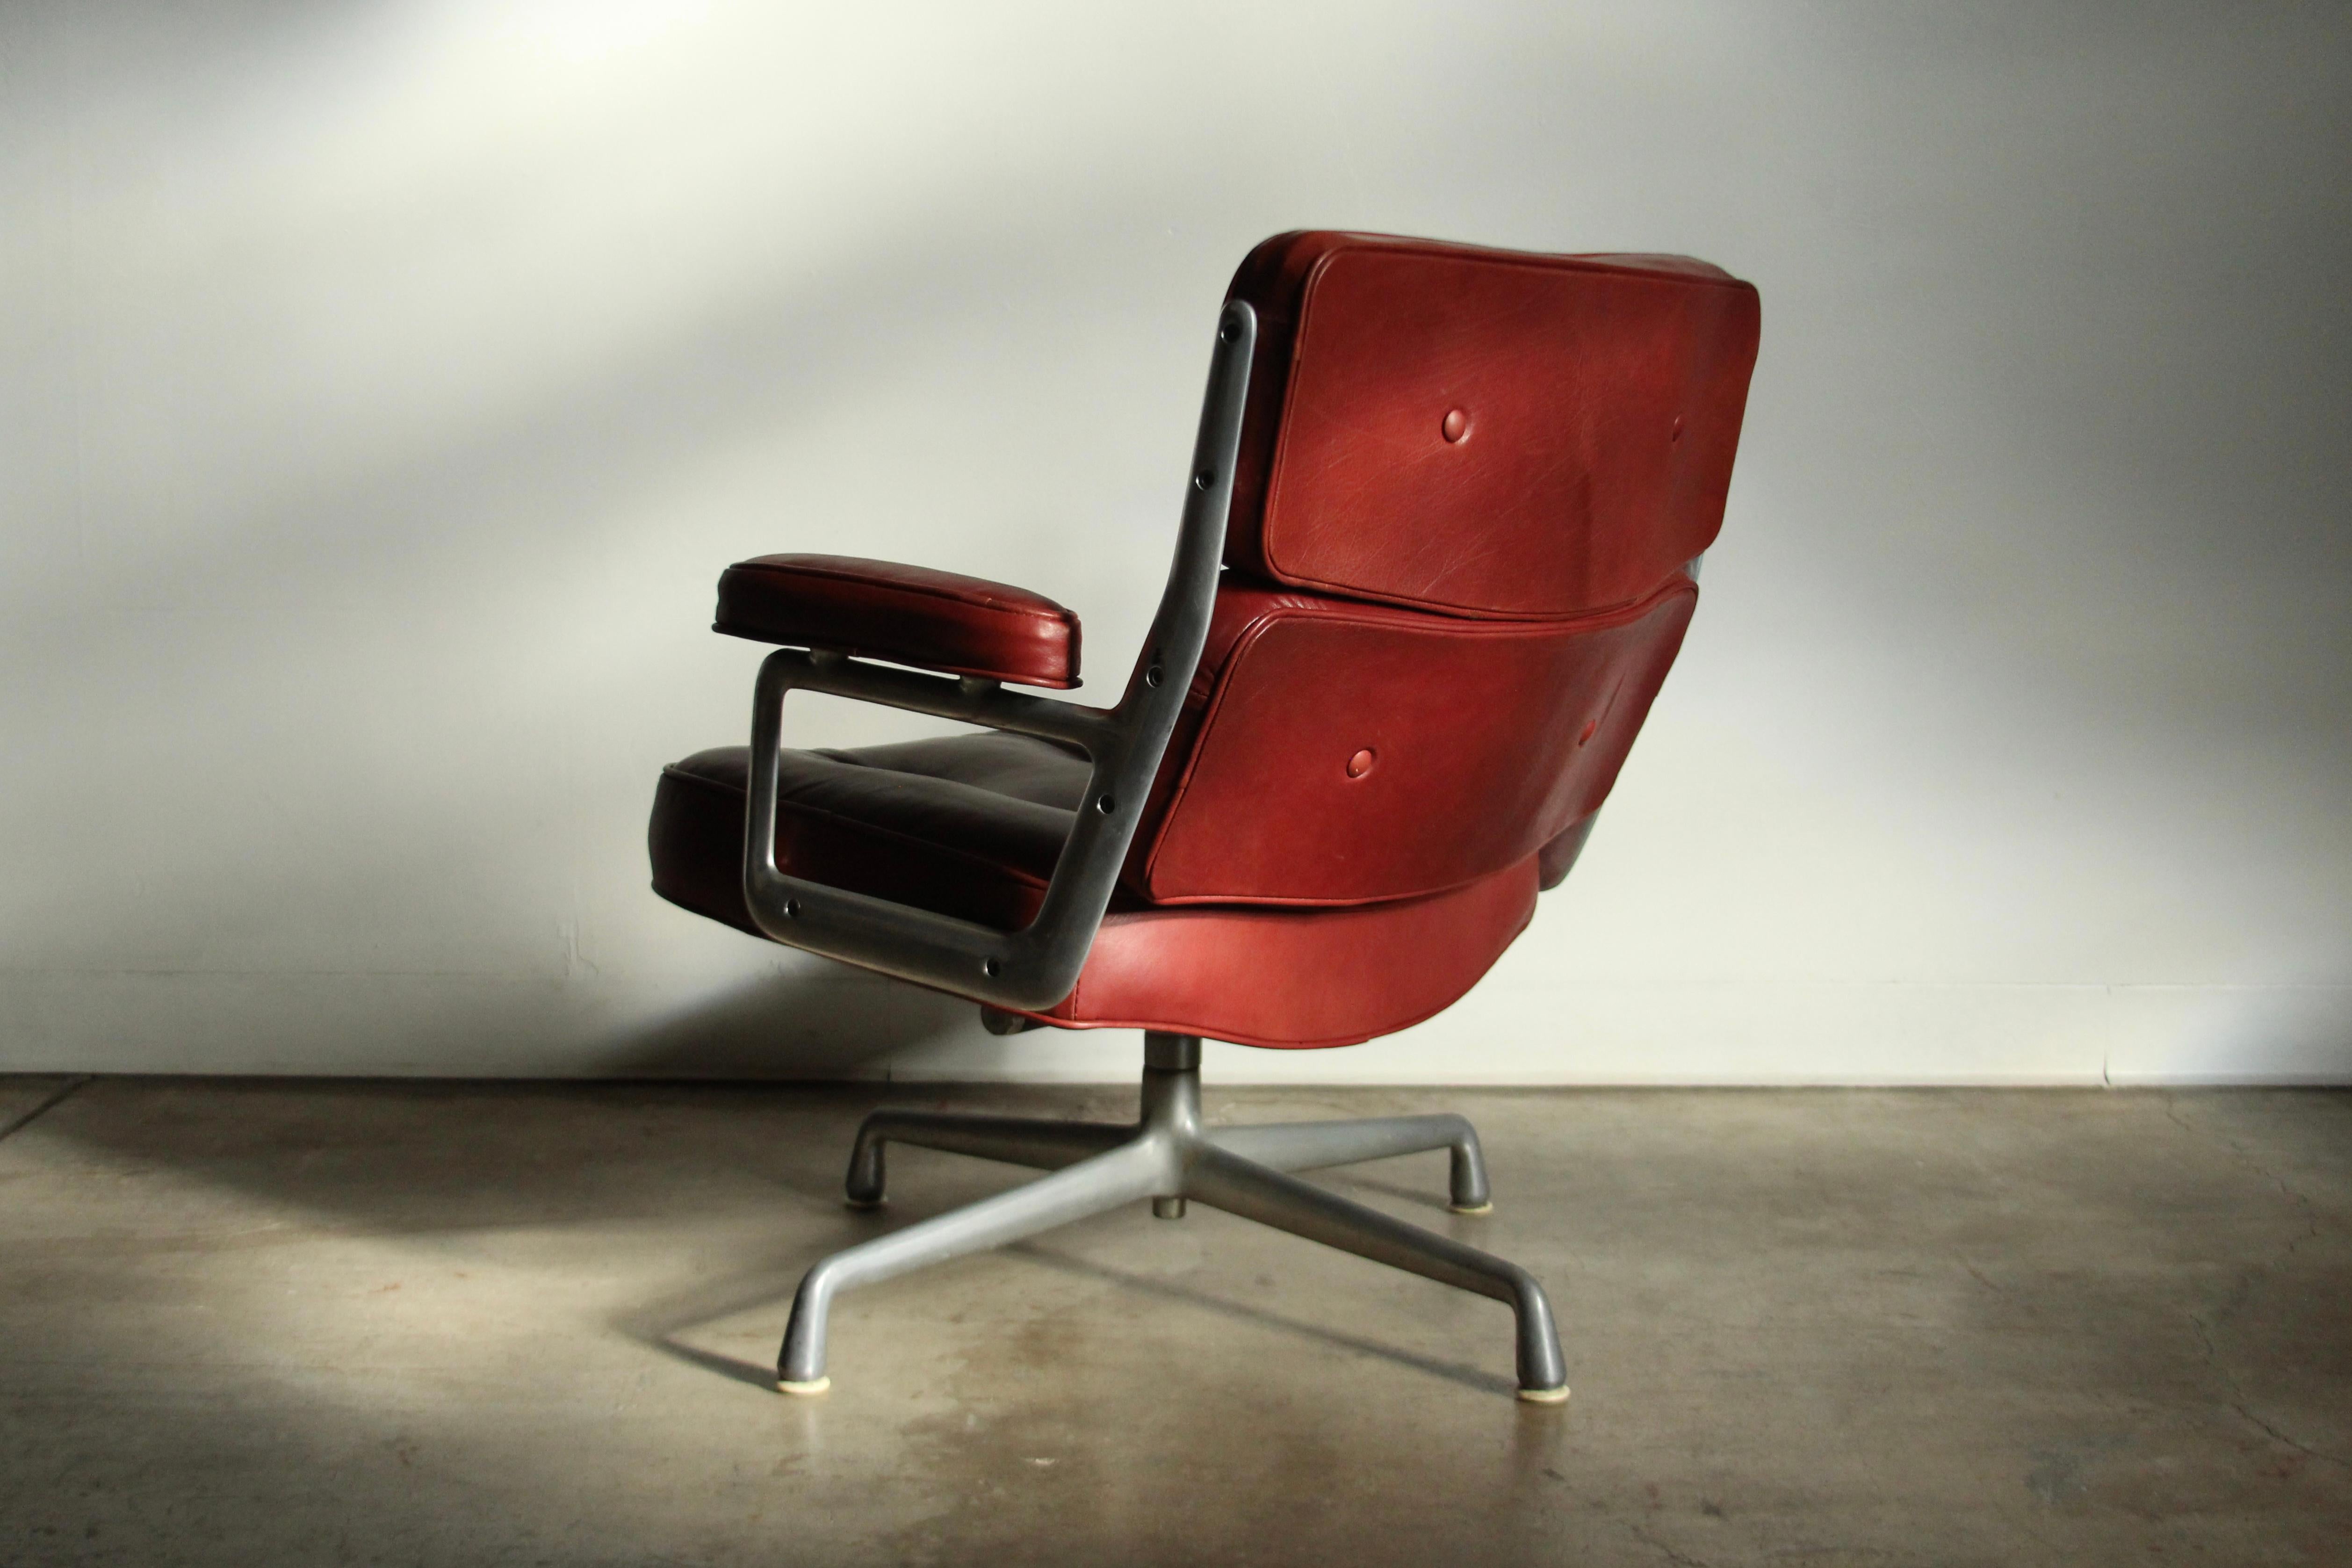 Eames Time Life Lobby Lounge Chair in Oxblood Calfskin Leather, 1960s For Sale 3